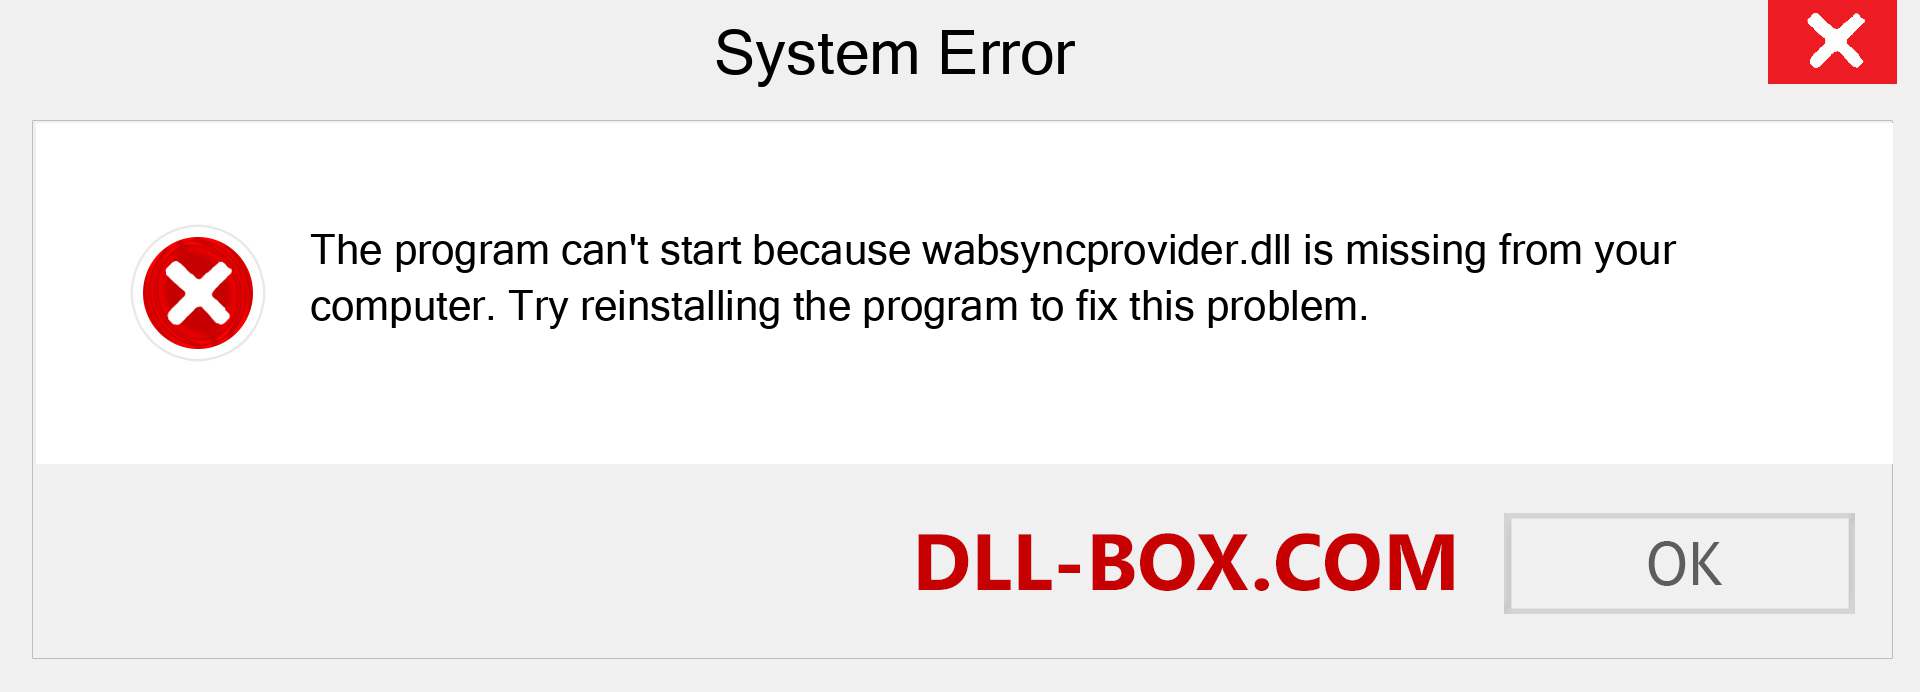  wabsyncprovider.dll file is missing?. Download for Windows 7, 8, 10 - Fix  wabsyncprovider dll Missing Error on Windows, photos, images